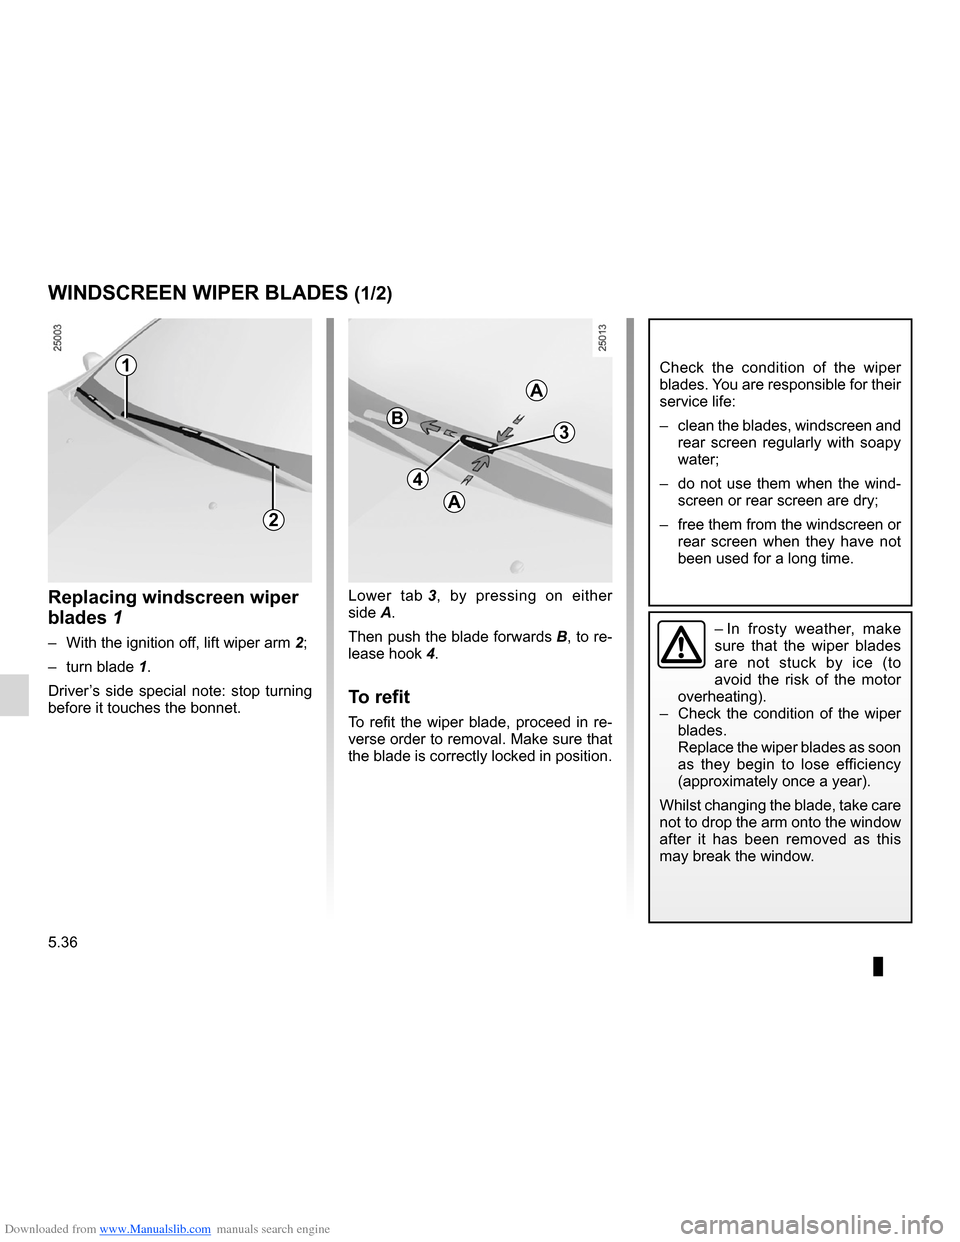 RENAULT CLIO 2012 X85 / 3.G Workshop Manual Downloaded from www.Manualslib.com manuals search engine wiper blades ......................................... (up to the end of the DU)
wipers blades  ............................................. (